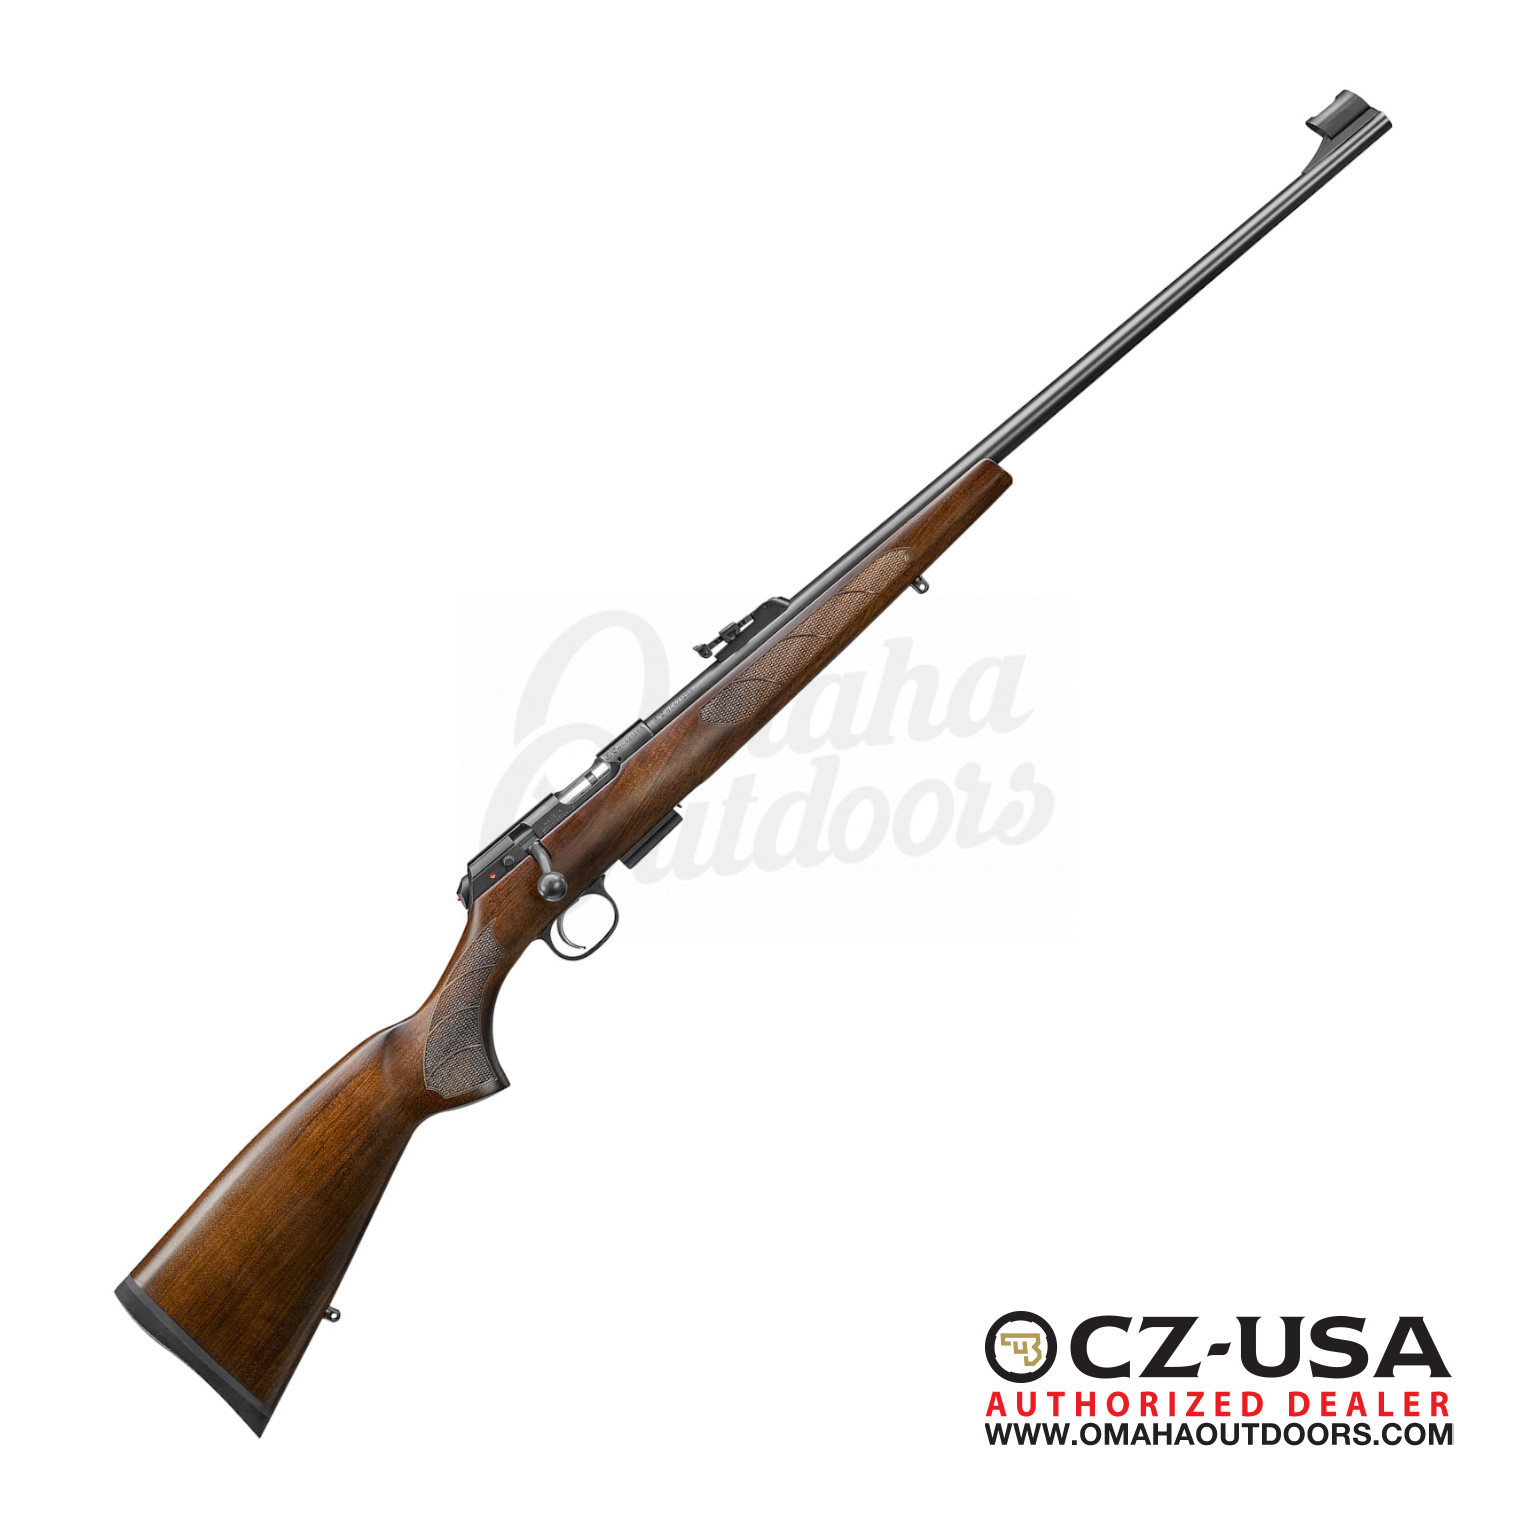 02302 CZ 457 Lux 22 WMR Rifle - In Stock